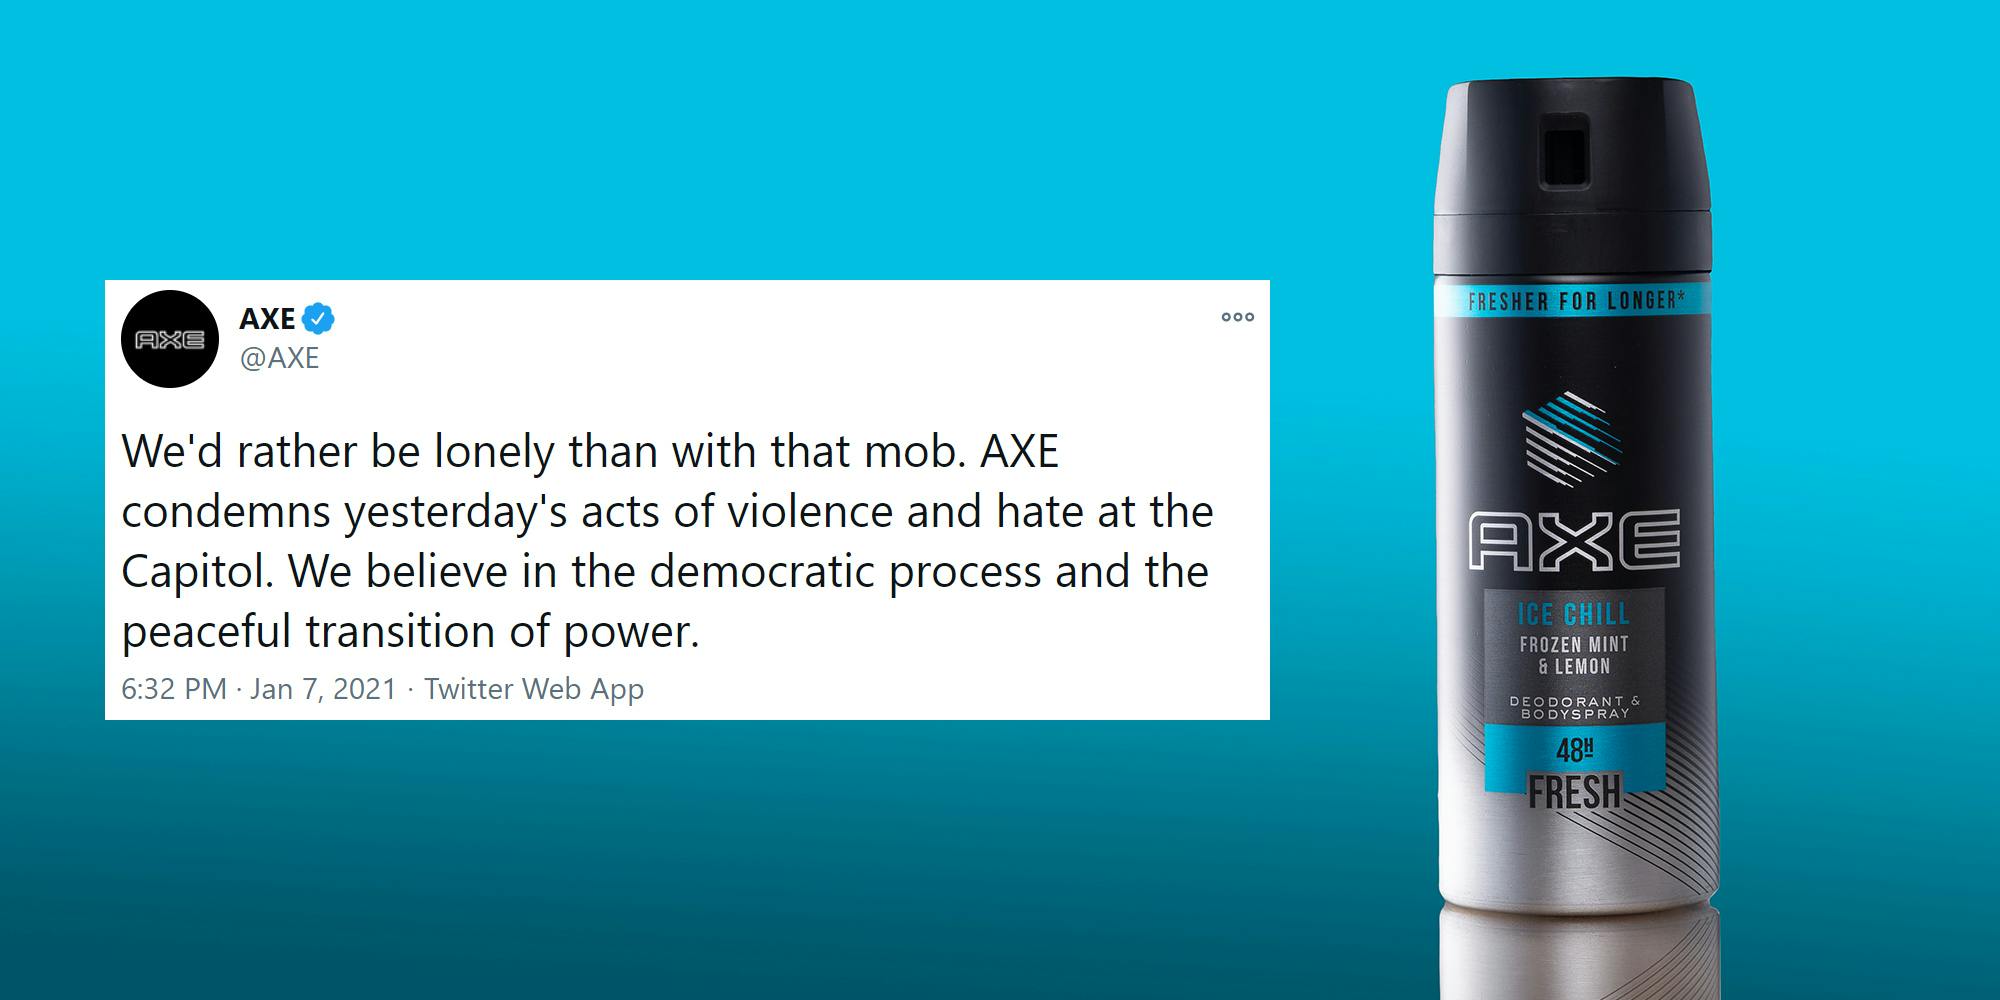 Axe tweet "We'd rather be lonely than with that mob. AXE condemns yesterday's acts of violence and hate at the Capitol. We believe in the democratic process and the peaceful transition ofpower." next to Axe body spray can